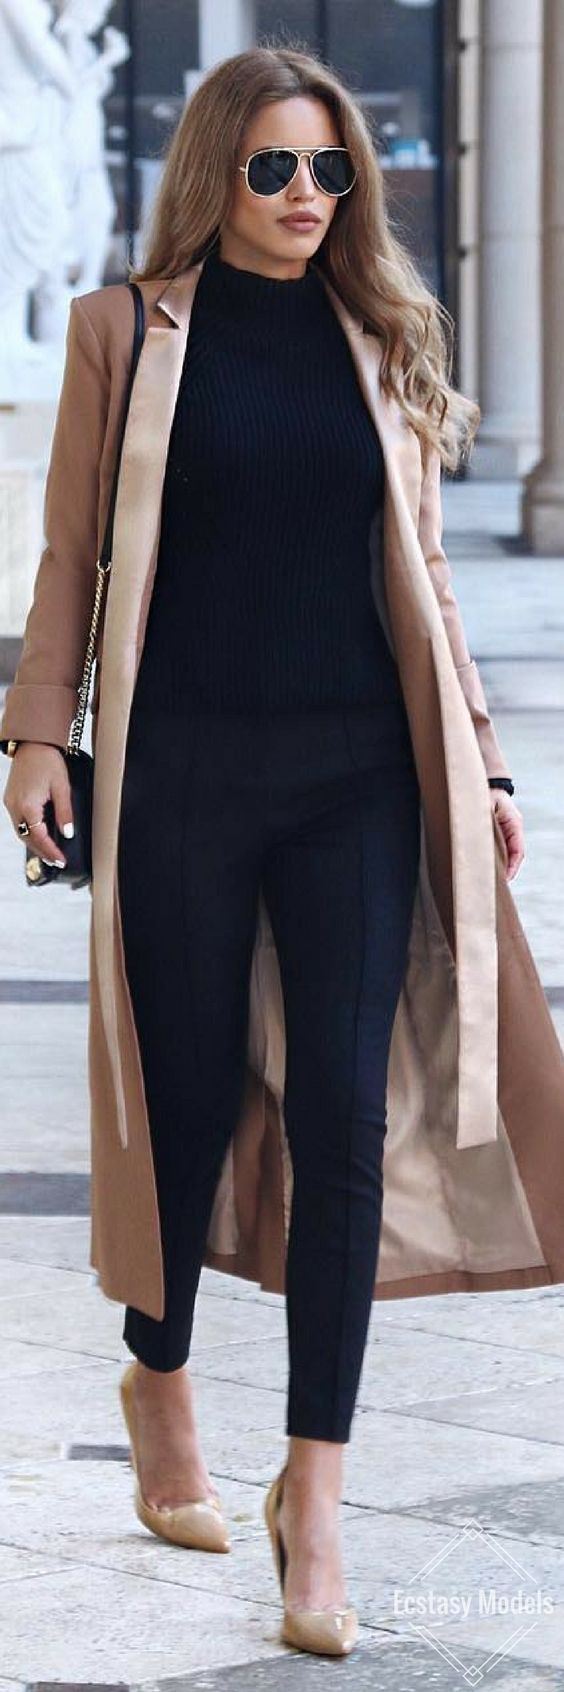 For a simple yet stylish work look try all black with camel-colored shoes and coat. Let Daily Dress Me help you find the perfect